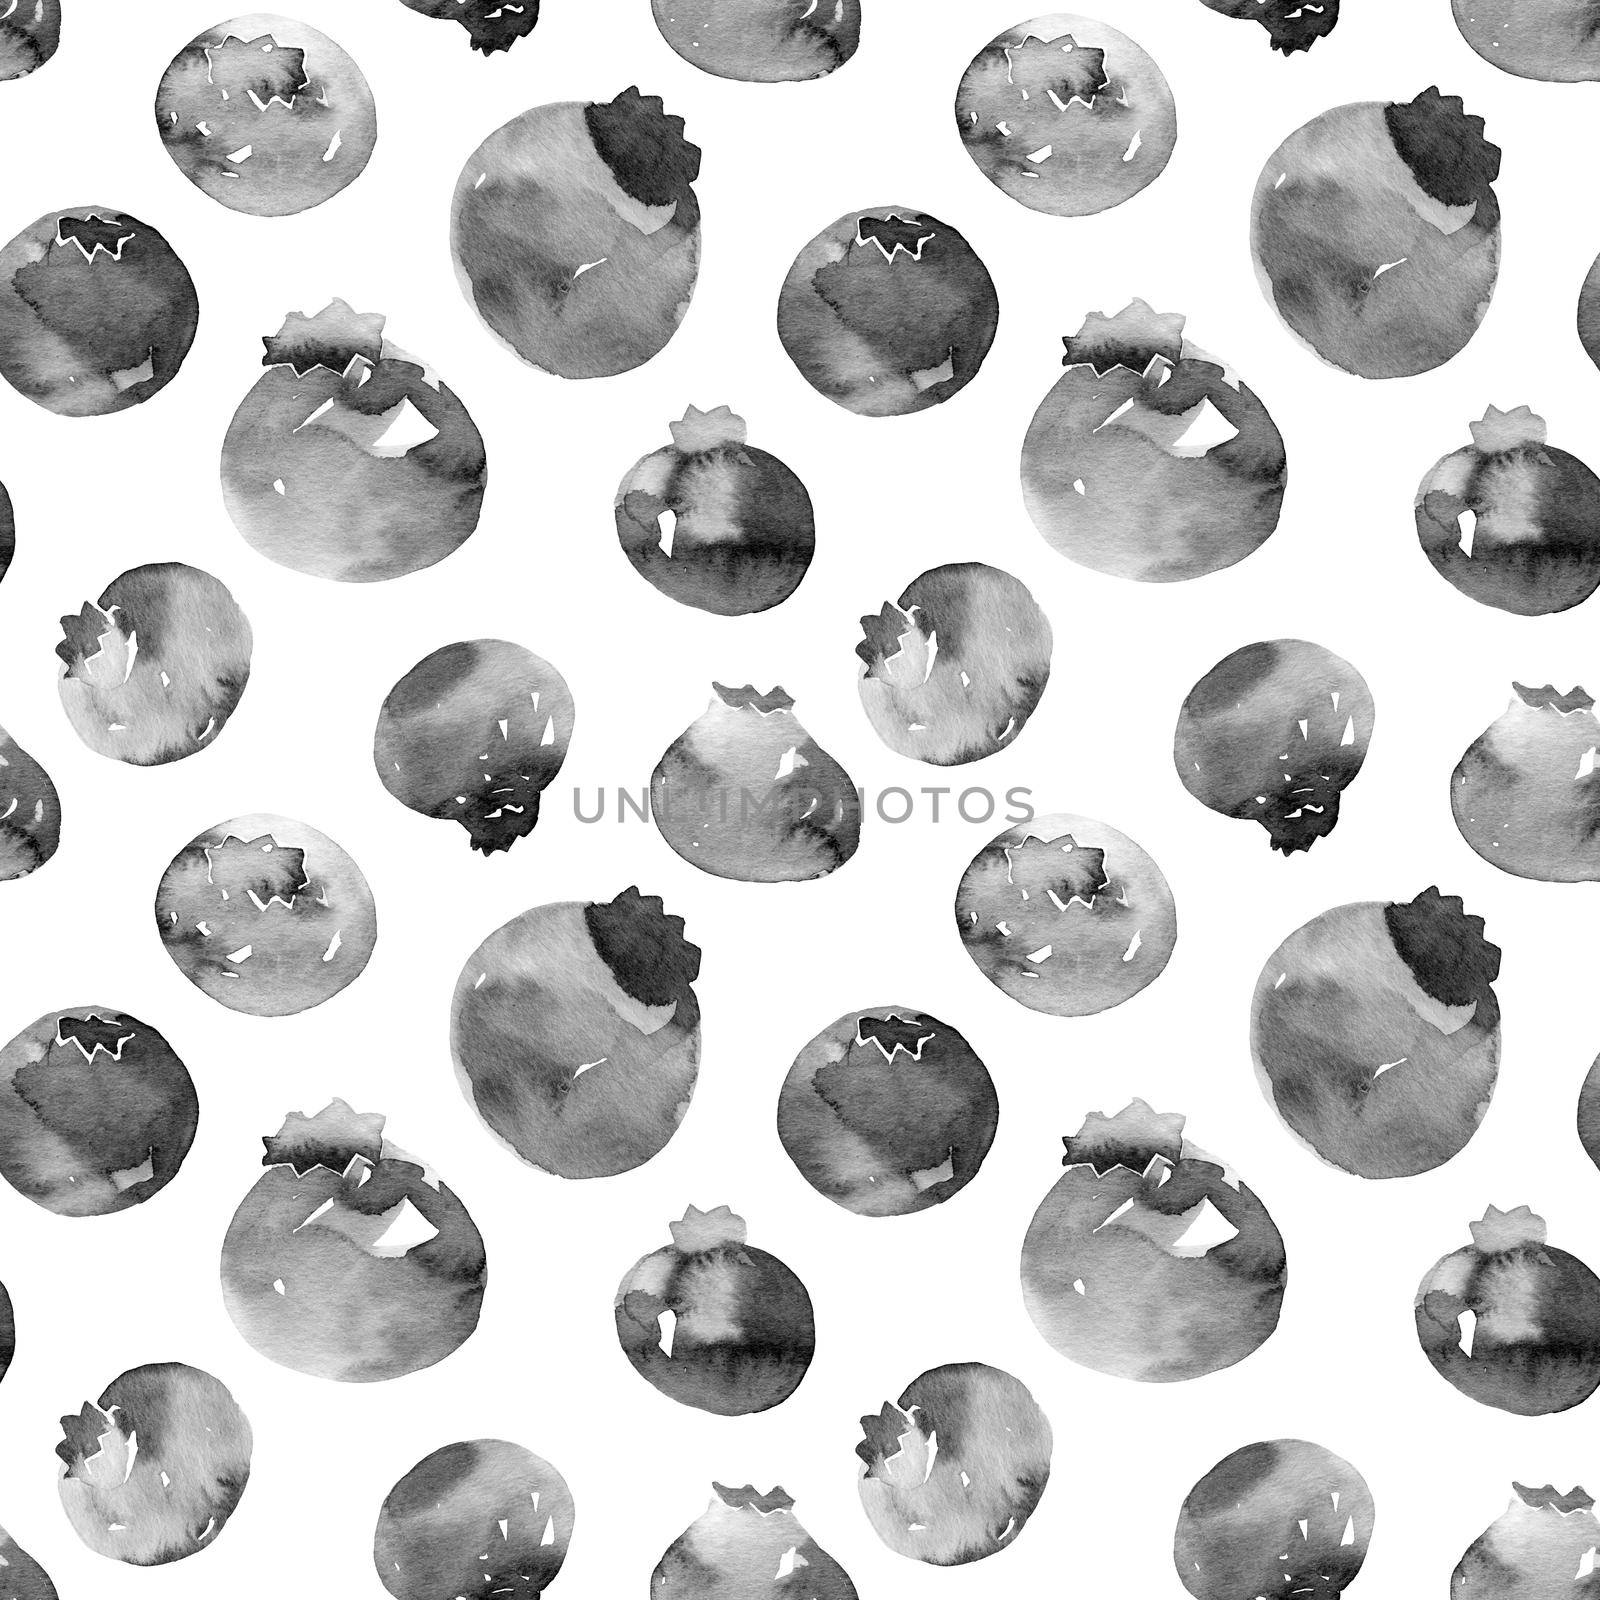 Black ink illustration of blackberries - grayscale painting on white background. Oriental traditional painting in style sumi-e or gohua. Seamless pattern.